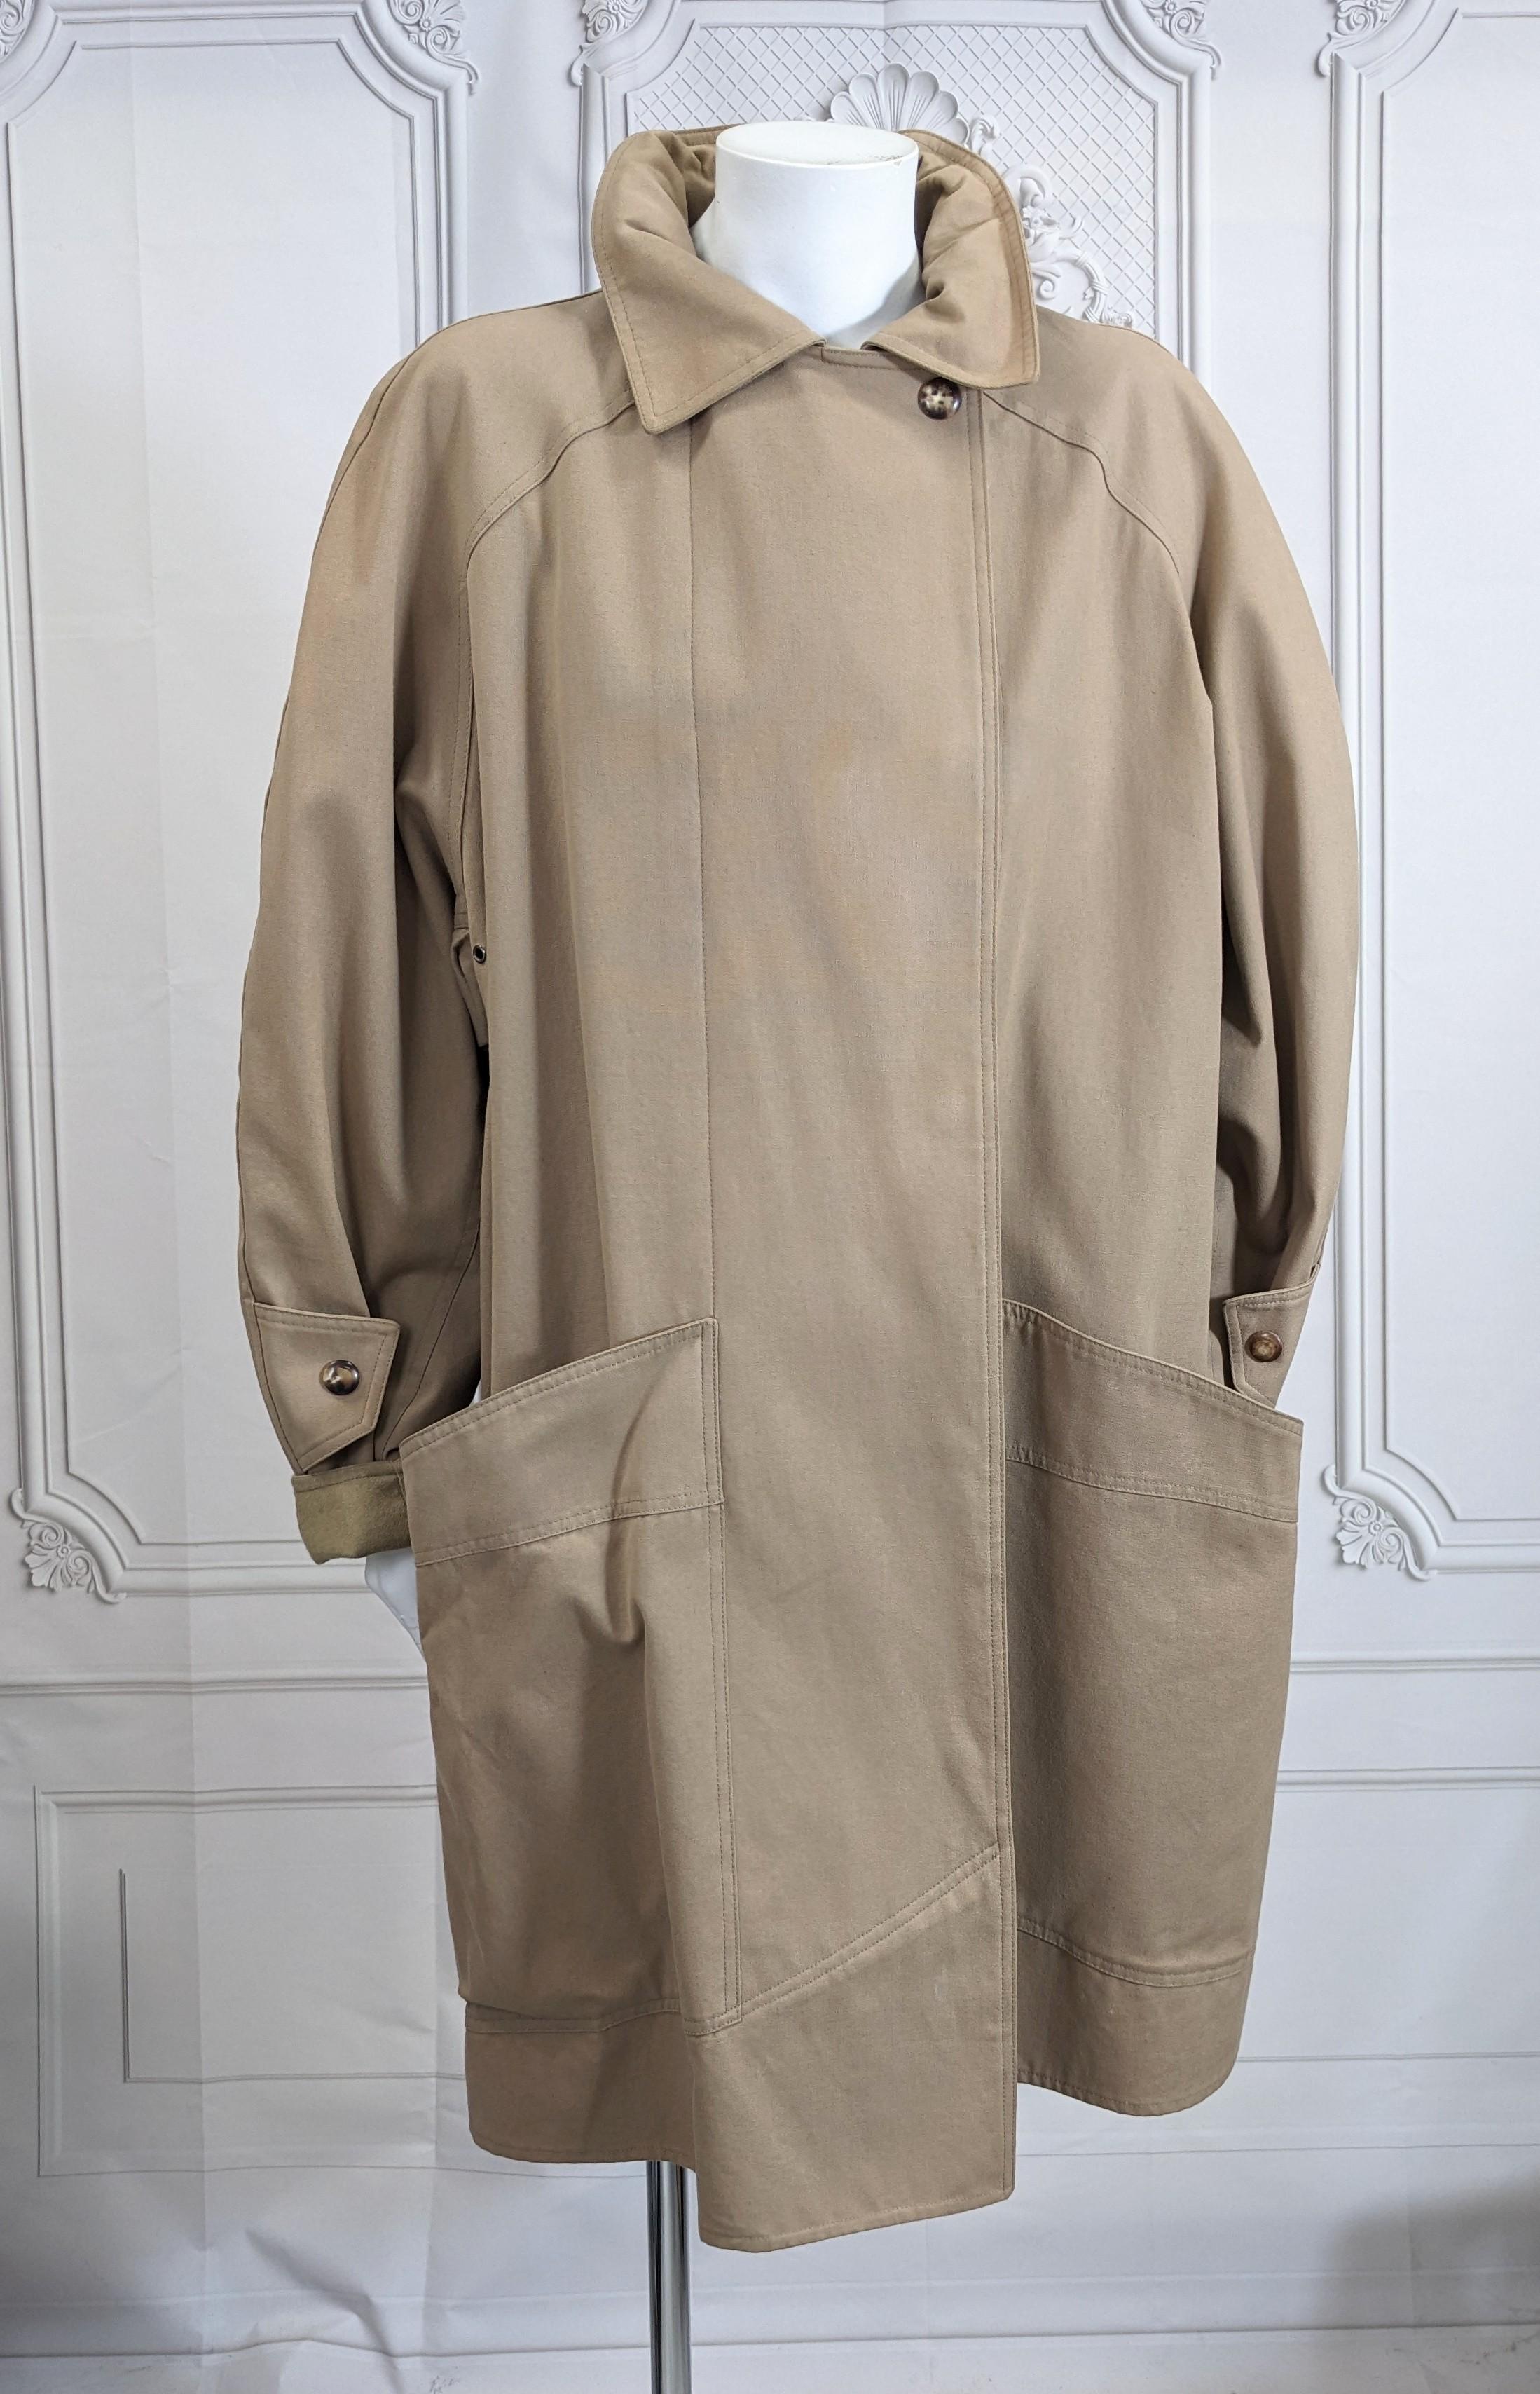 Anne Marie Beretta Wool Lined Brushed Cotton Twill Coat from the 1980's France. Oversized cut with massive signature pockets which reach to hem. Signature Horn covered snaps are used to close coat. Brushed cotton completely back in wool melton. Deep